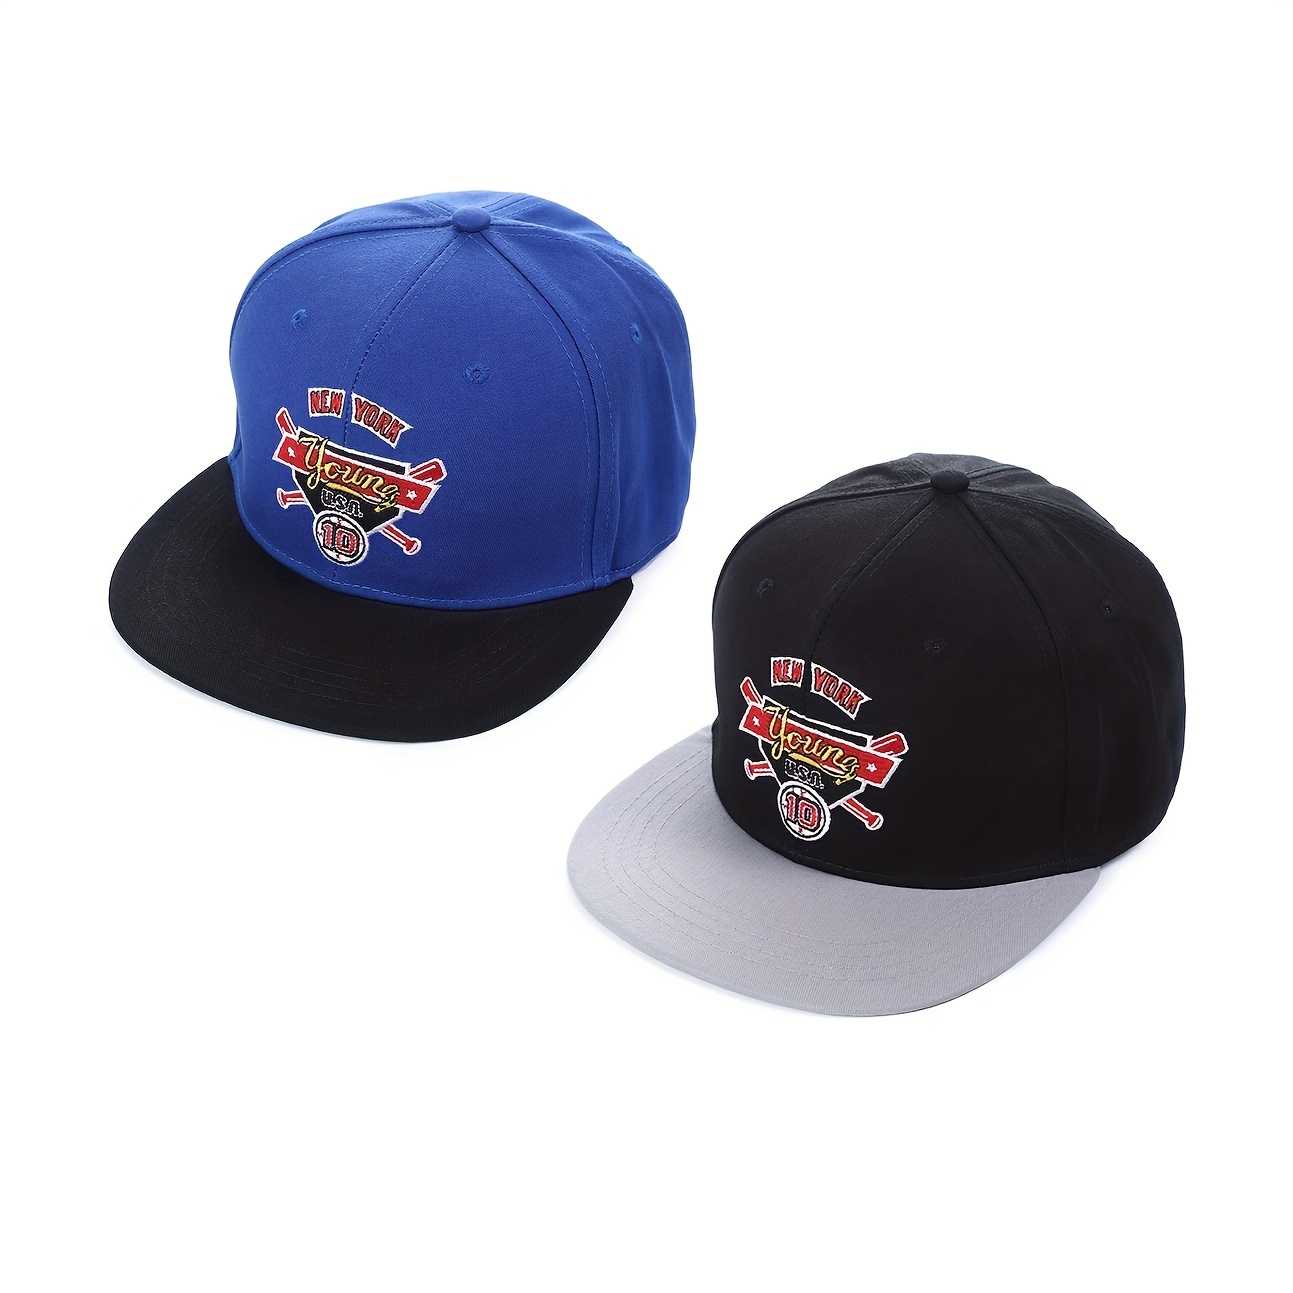 Youth Red Chicago Bulls Street Fashion Snapback Hat